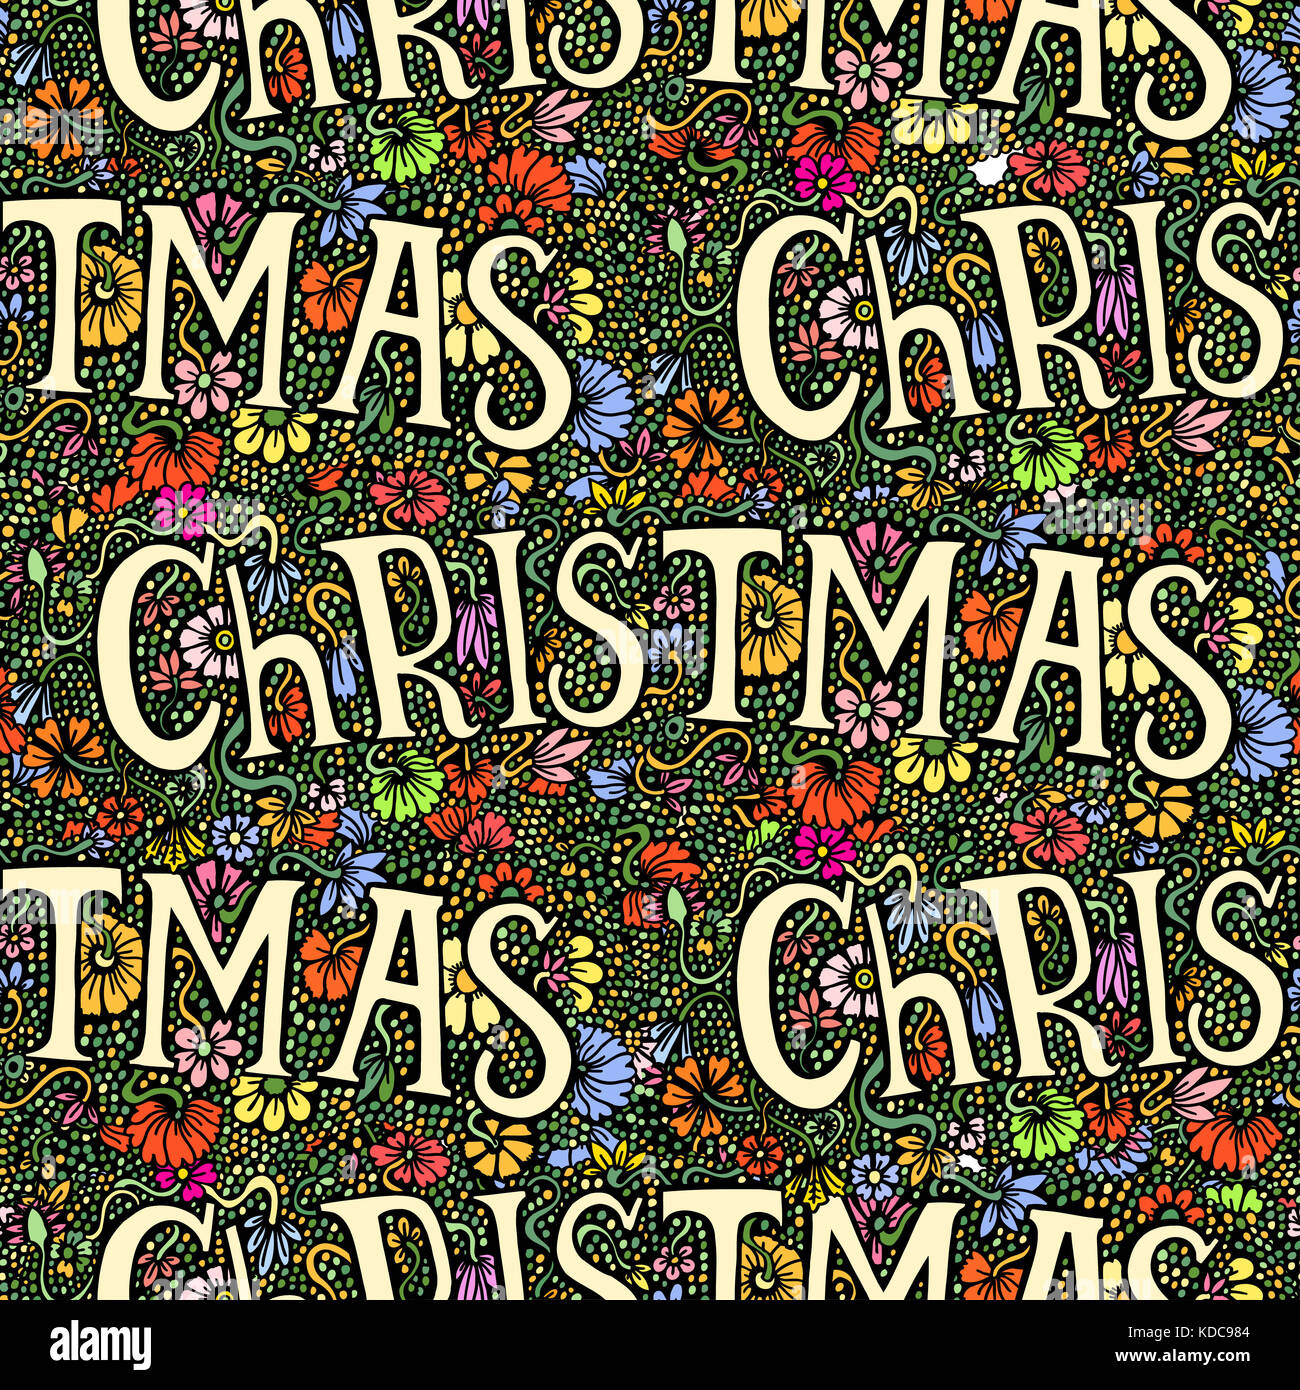 Seamless Alphabet word Christmas on floral hand drawn background Art Stock Image